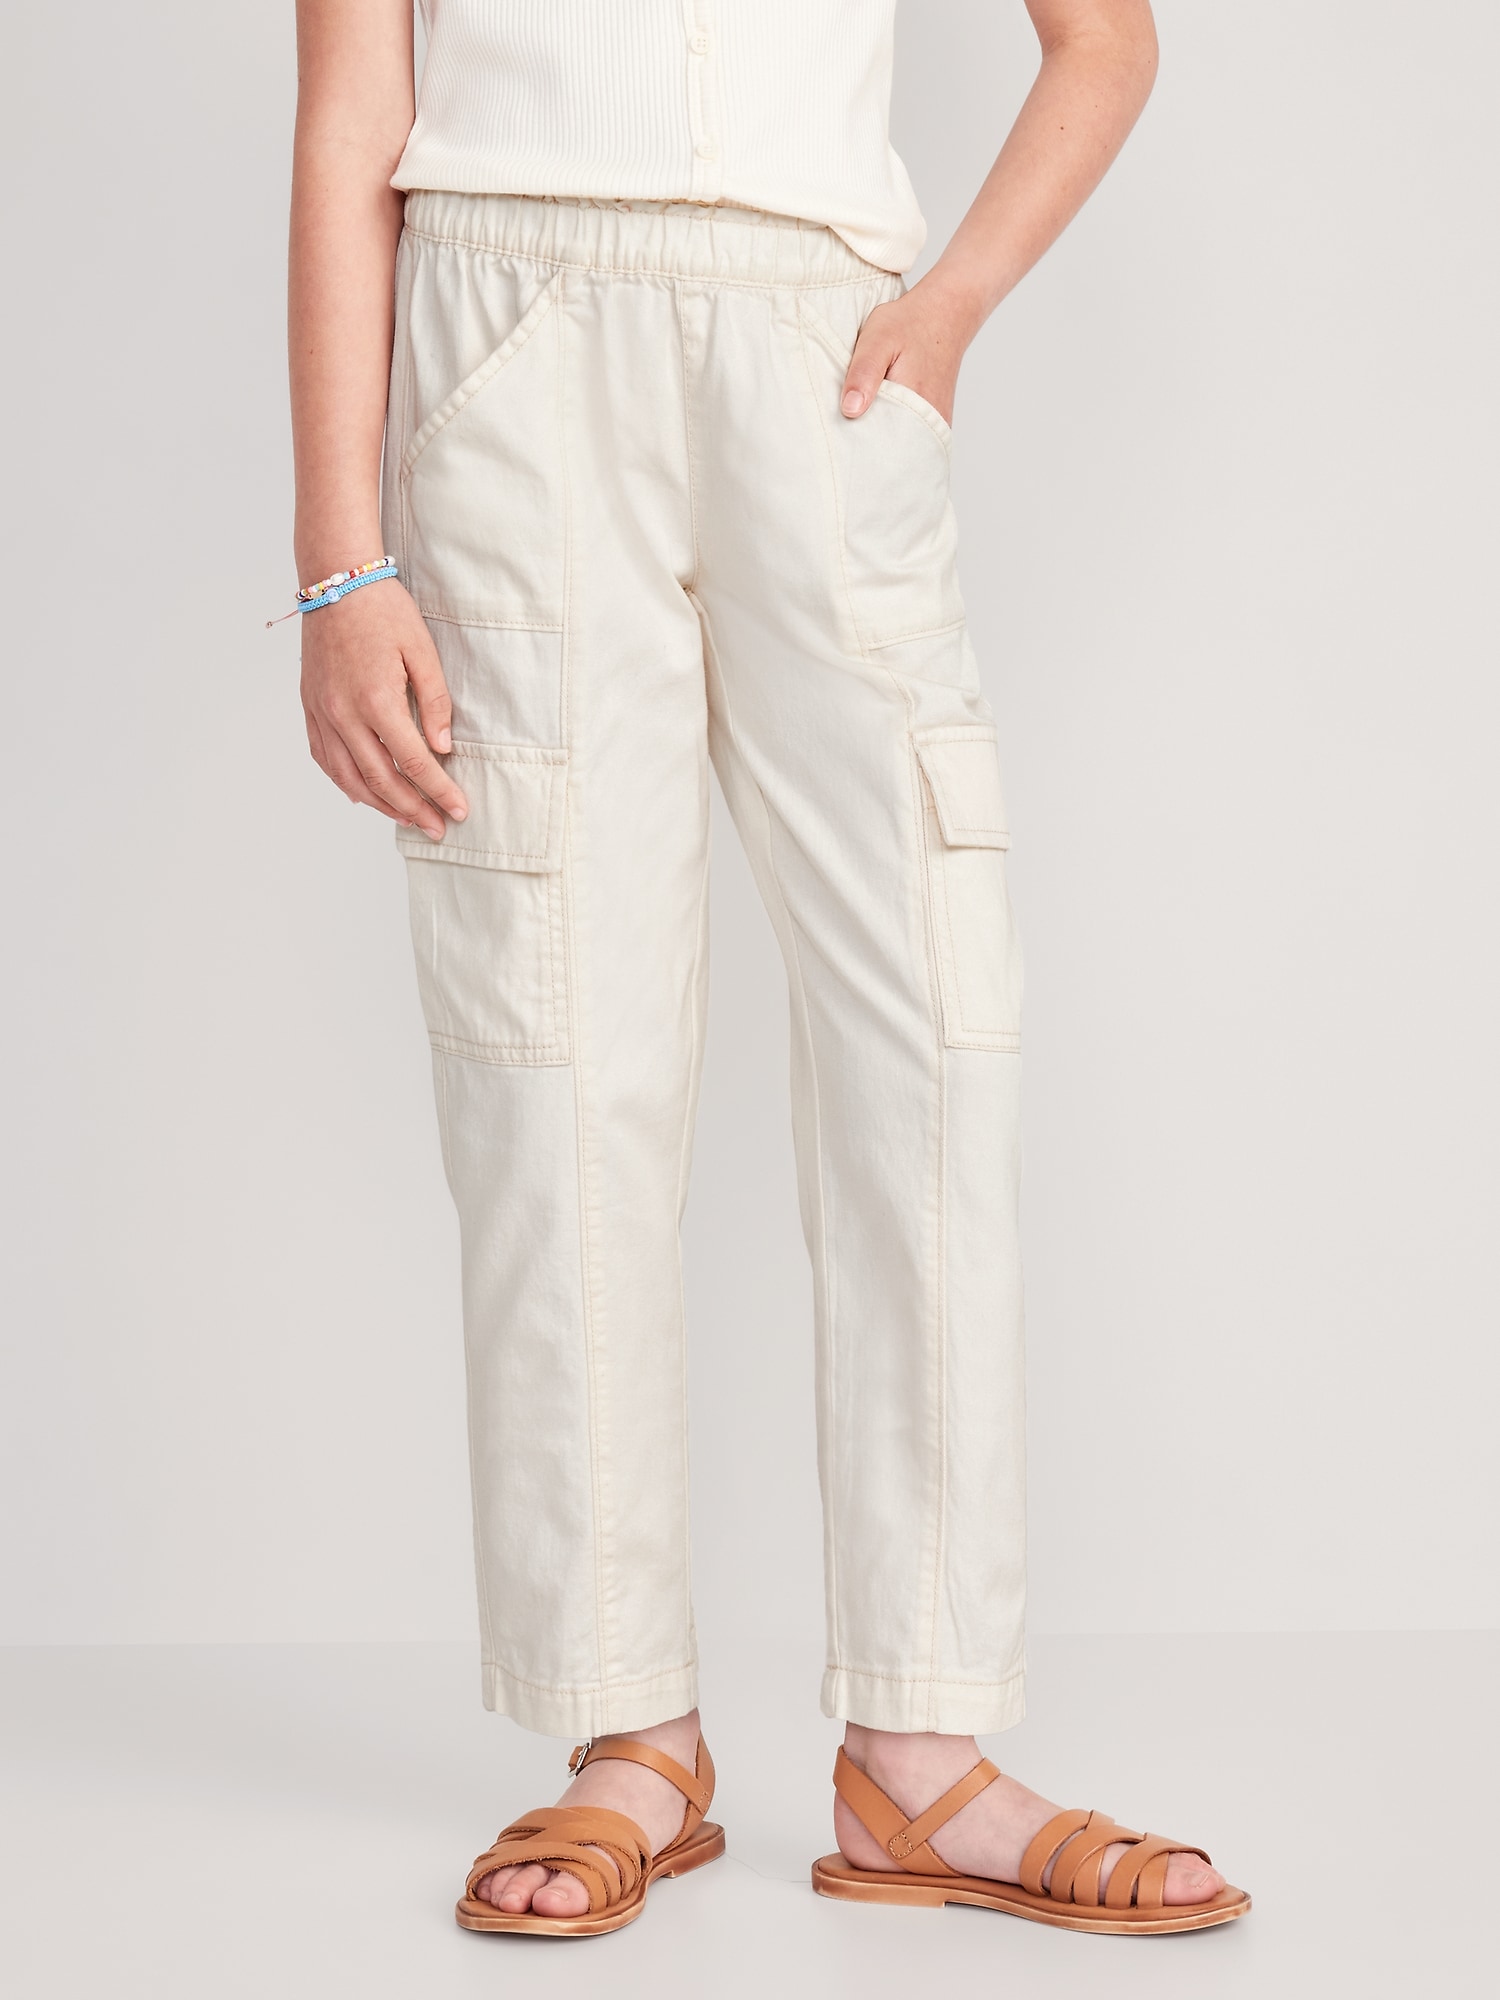 Buy Navy & White Trousers & Pants for Women by Kryptic Online